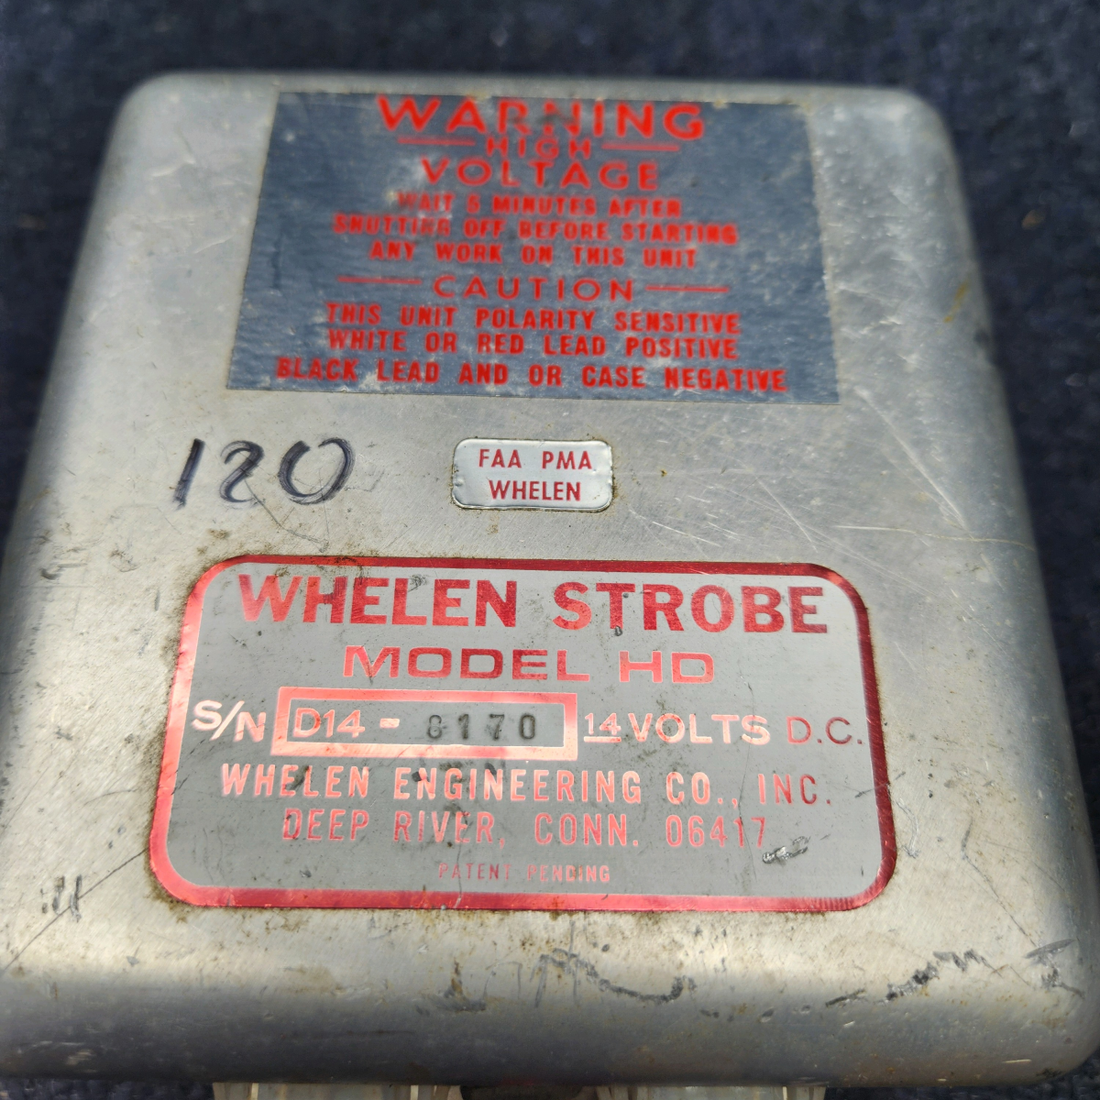 Used aircraft parts for sale, A413T2-14 DF Whelen Strobe Power Supply WHELEN STROBE LIGHT POWER SUPLY